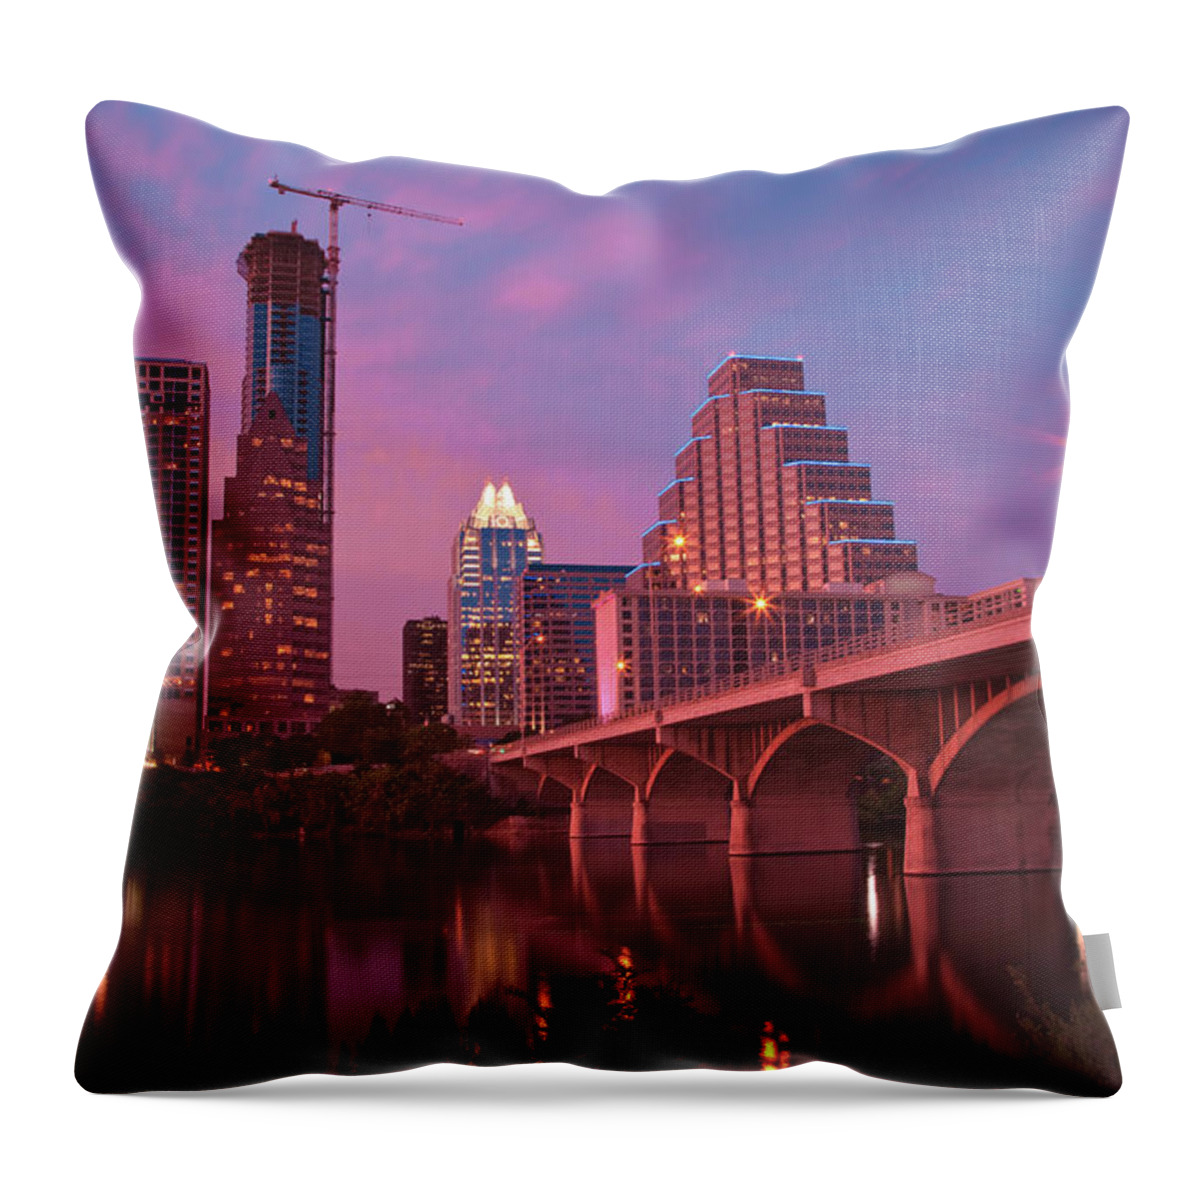 Downtown District Throw Pillow featuring the photograph Downtown In The City Of Austin by Narawon